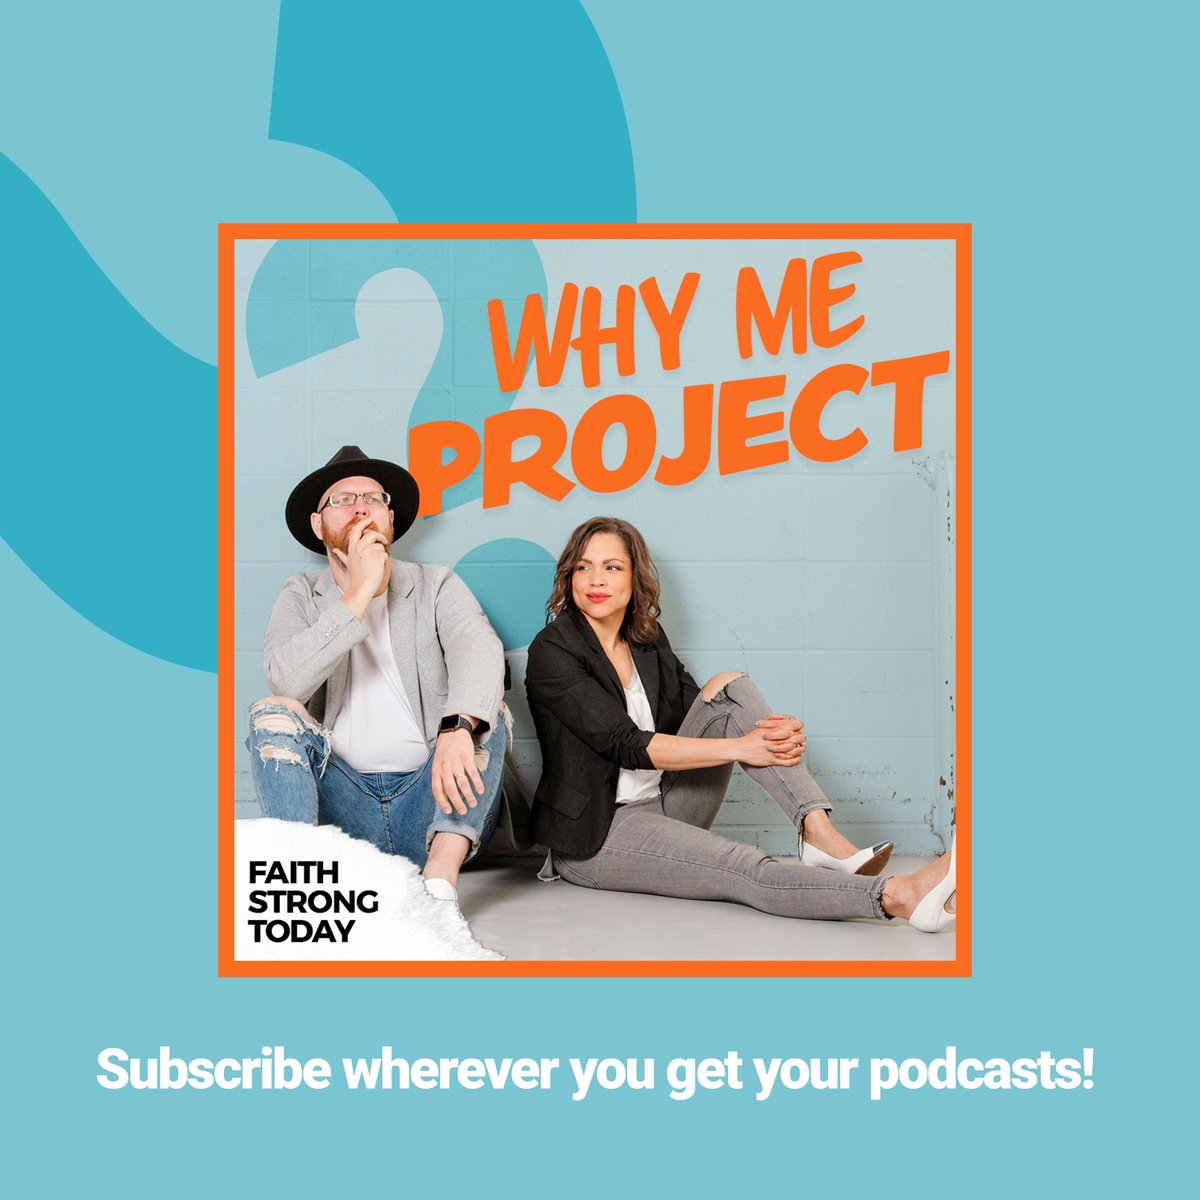 We are very excited to share this episode with you! -->  omny.fm/shows/why-me-p…❤️
#whymeproject #whyme #shareyourstory #travel #perserverance #christianpodcast #christianpodcasters #christianpodcasts #itswednesday #testimonytime #lifestories #faithstrongtoday